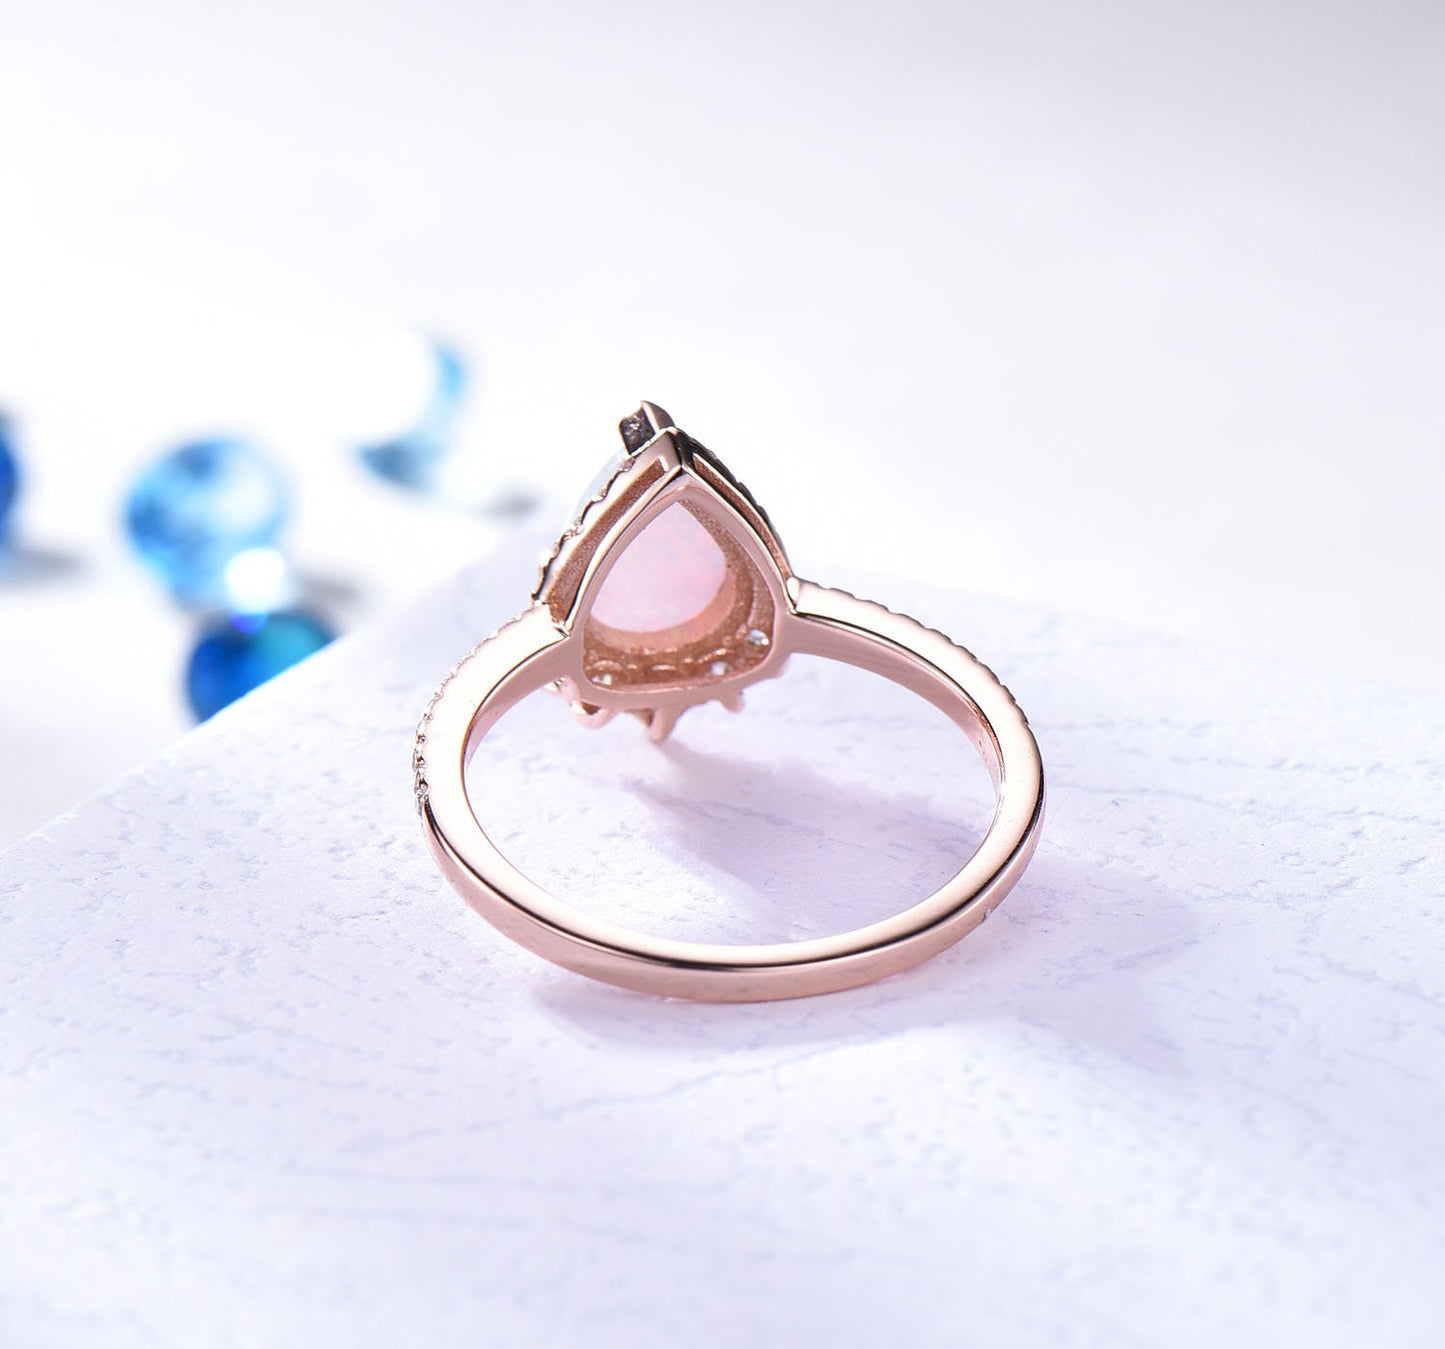 Pear cut opal engagement ring rose gold  women diamond halo ring diamond wedding band October ring promise bridal anniversary gift for her